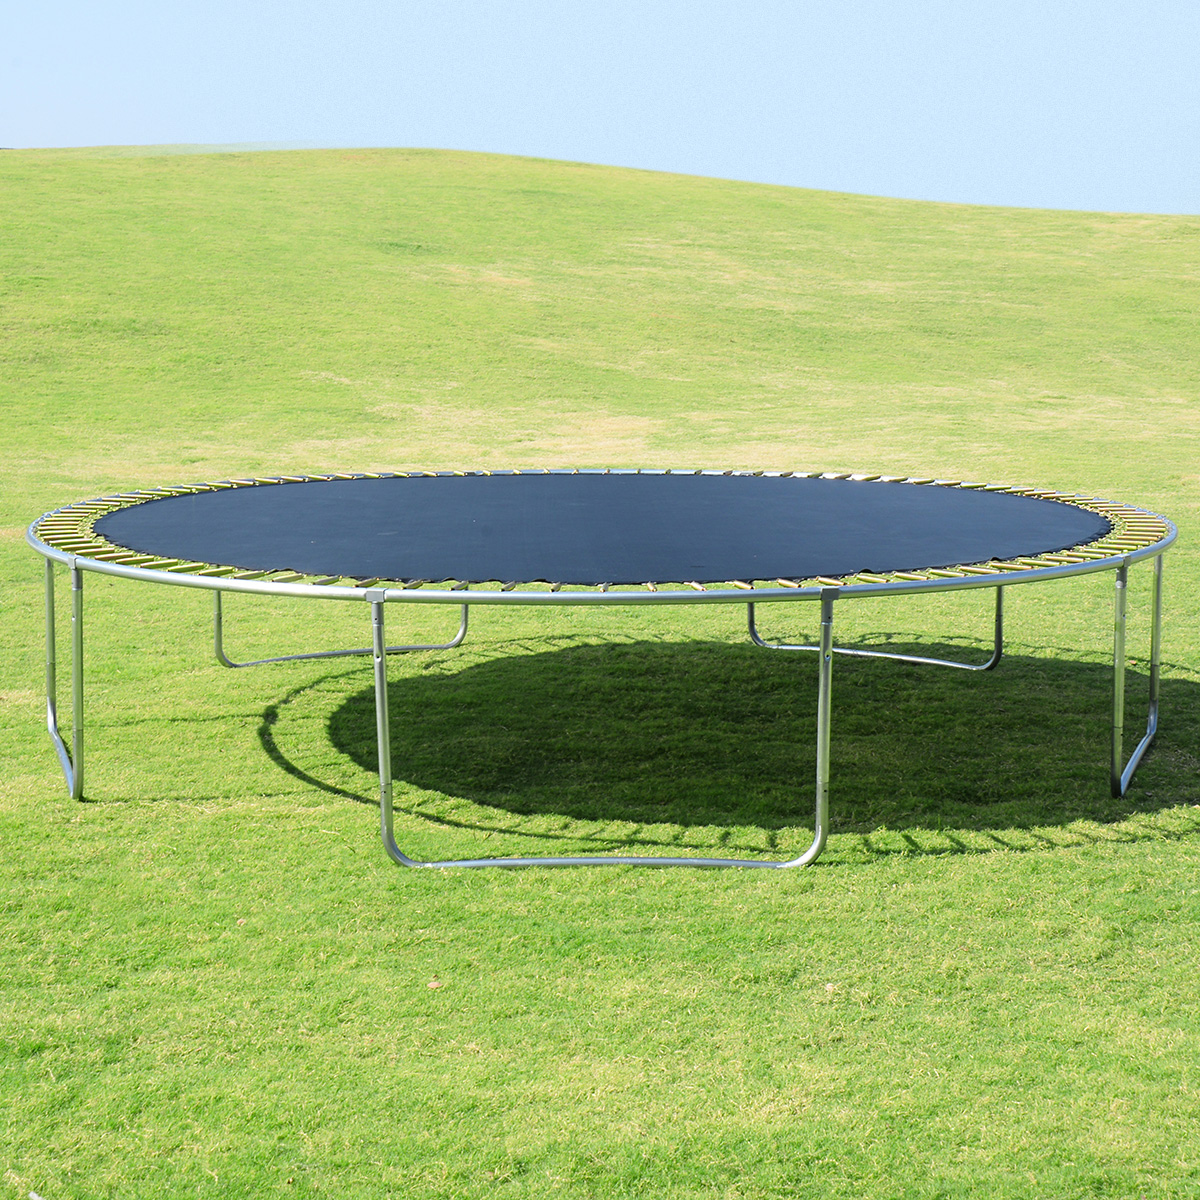 Gymax 15 FT Trampoline Combo Bounce Jump Safety Enclosure Net - image 6 of 10